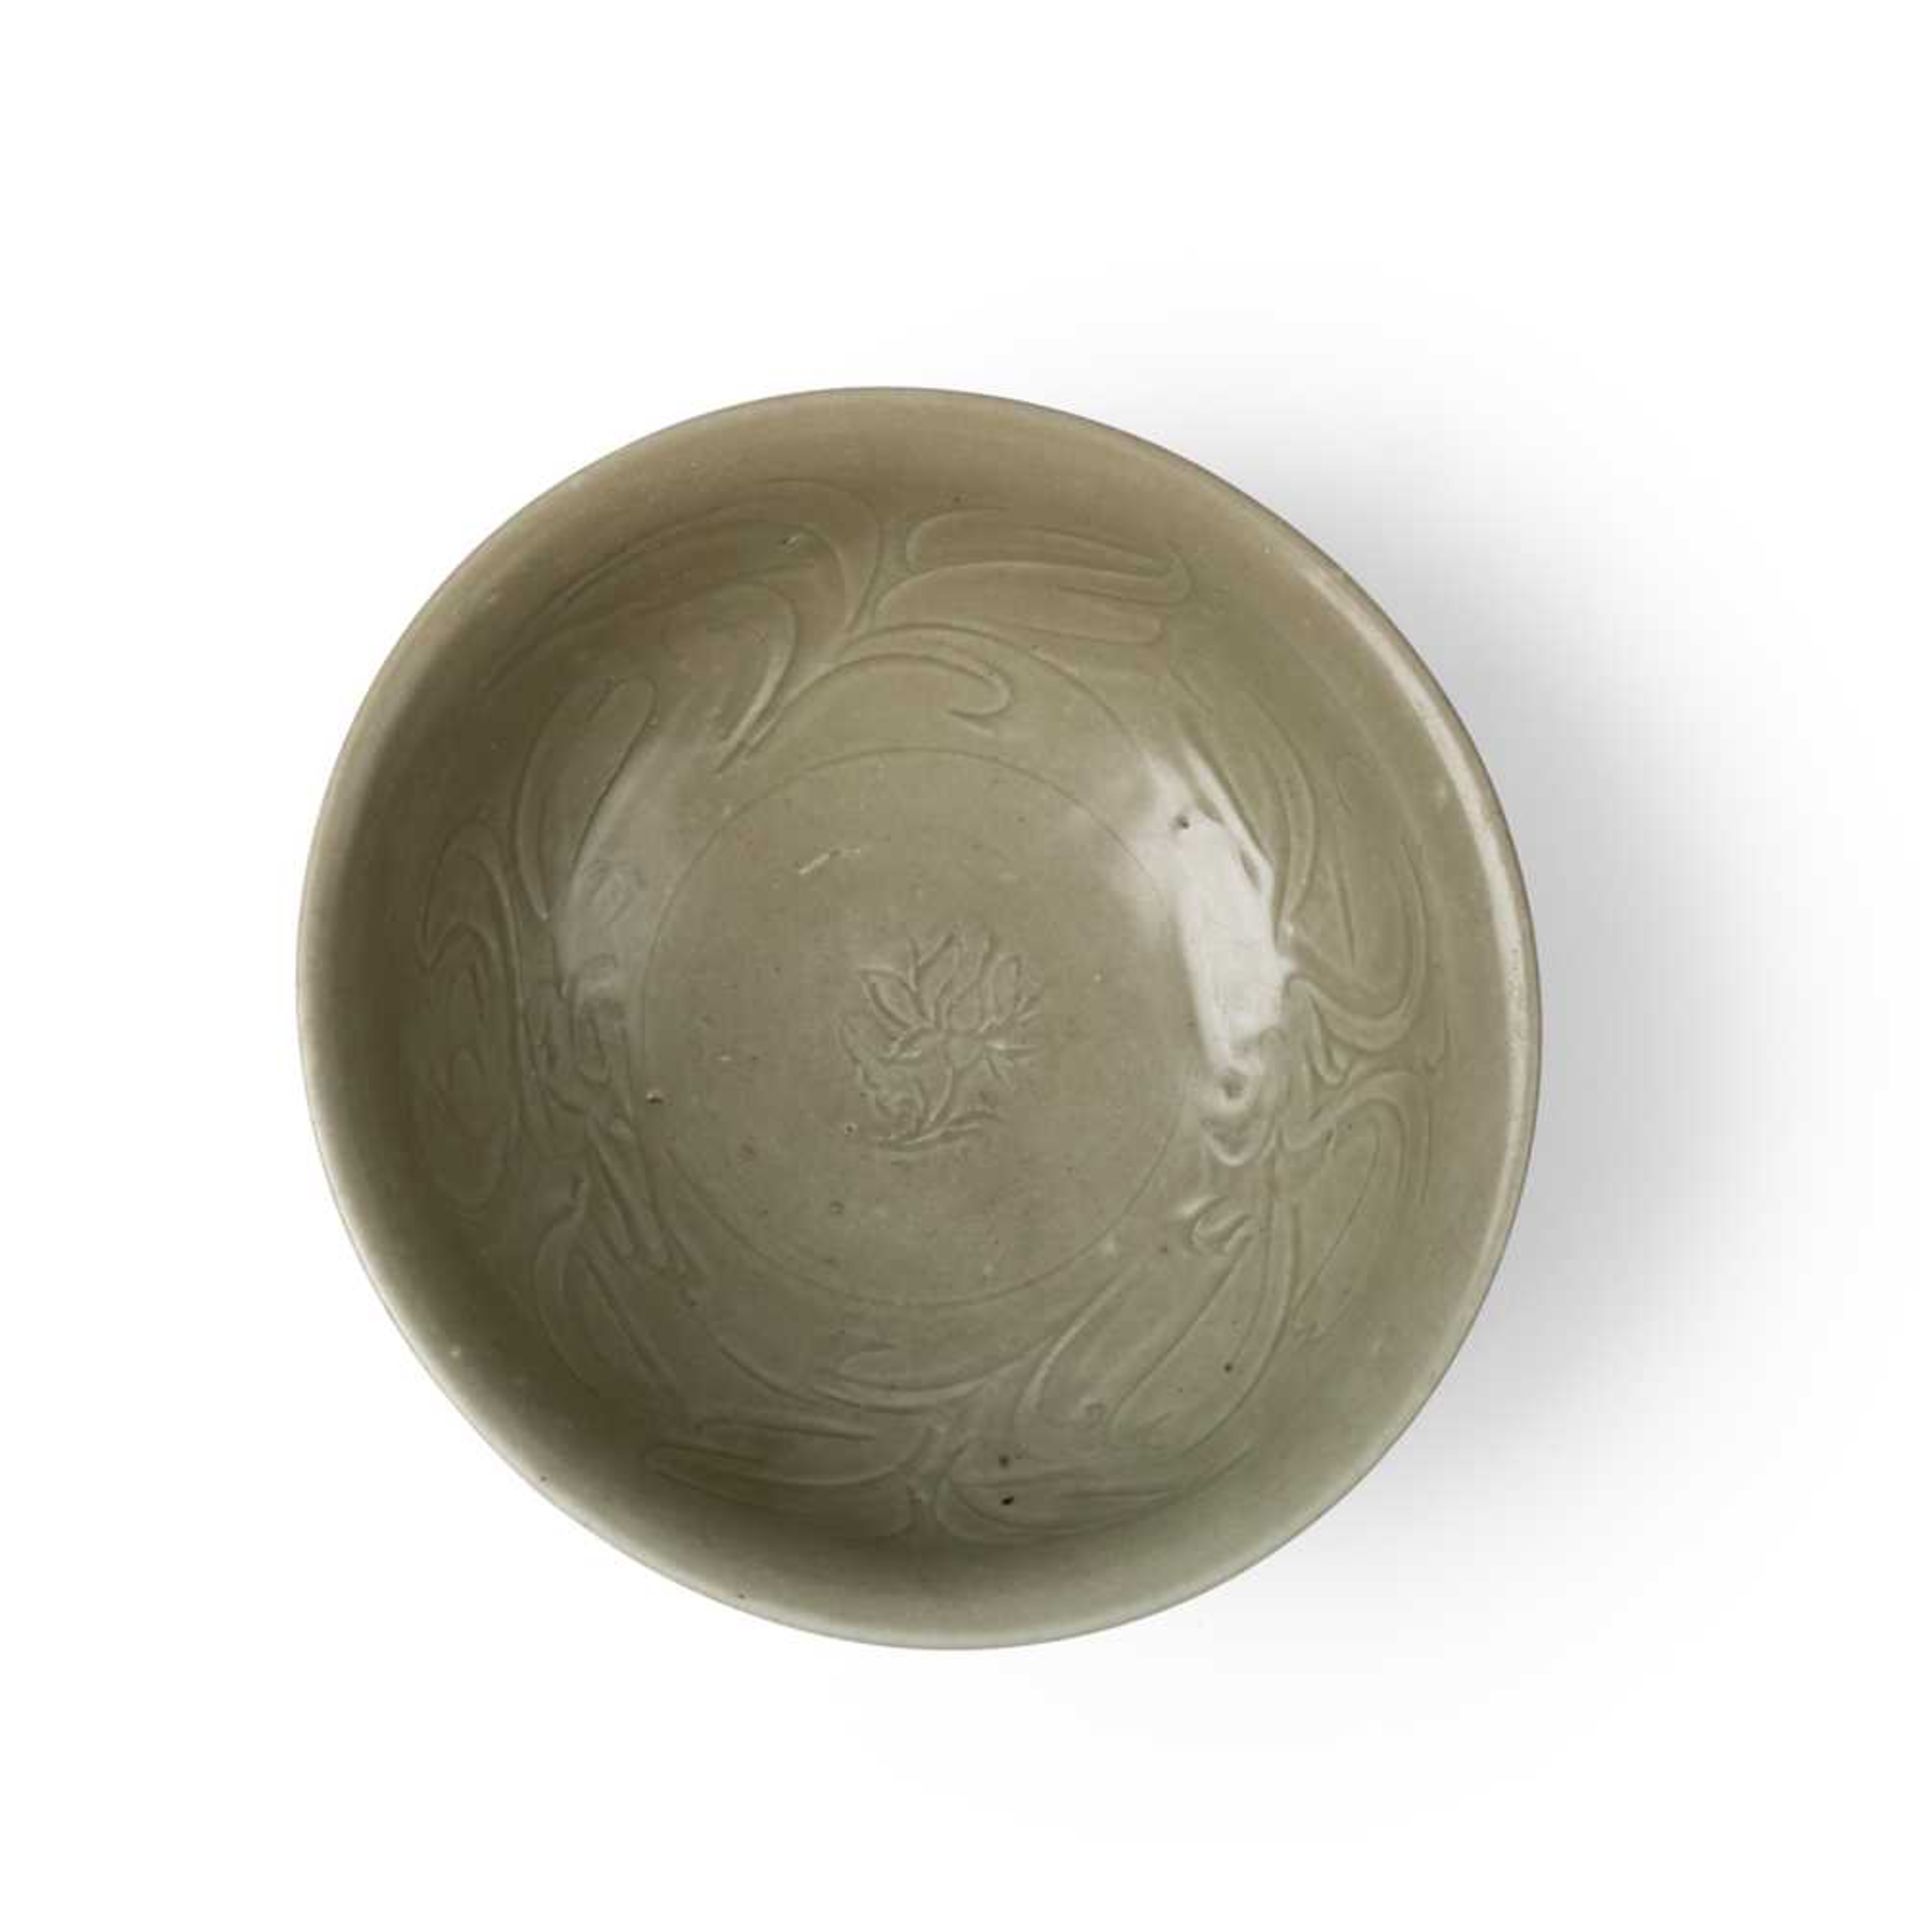 TWO CELADON-GLAZED BOWLS TANG TO YUAN DYNASTY - Image 8 of 10